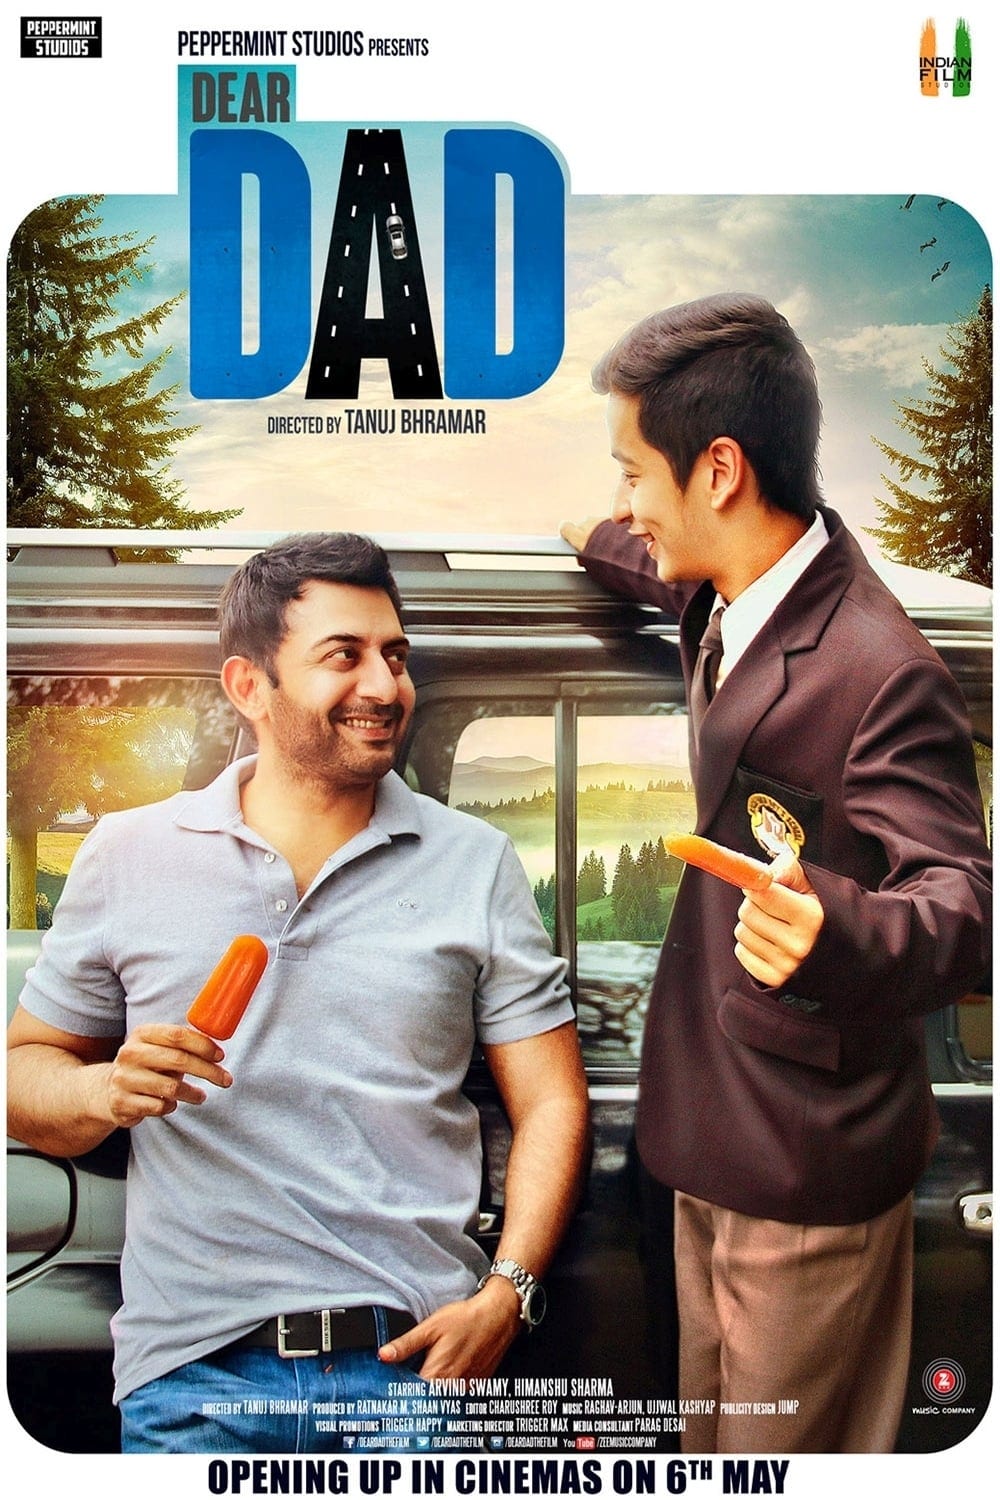 Poster for the movie "Dear Dad"